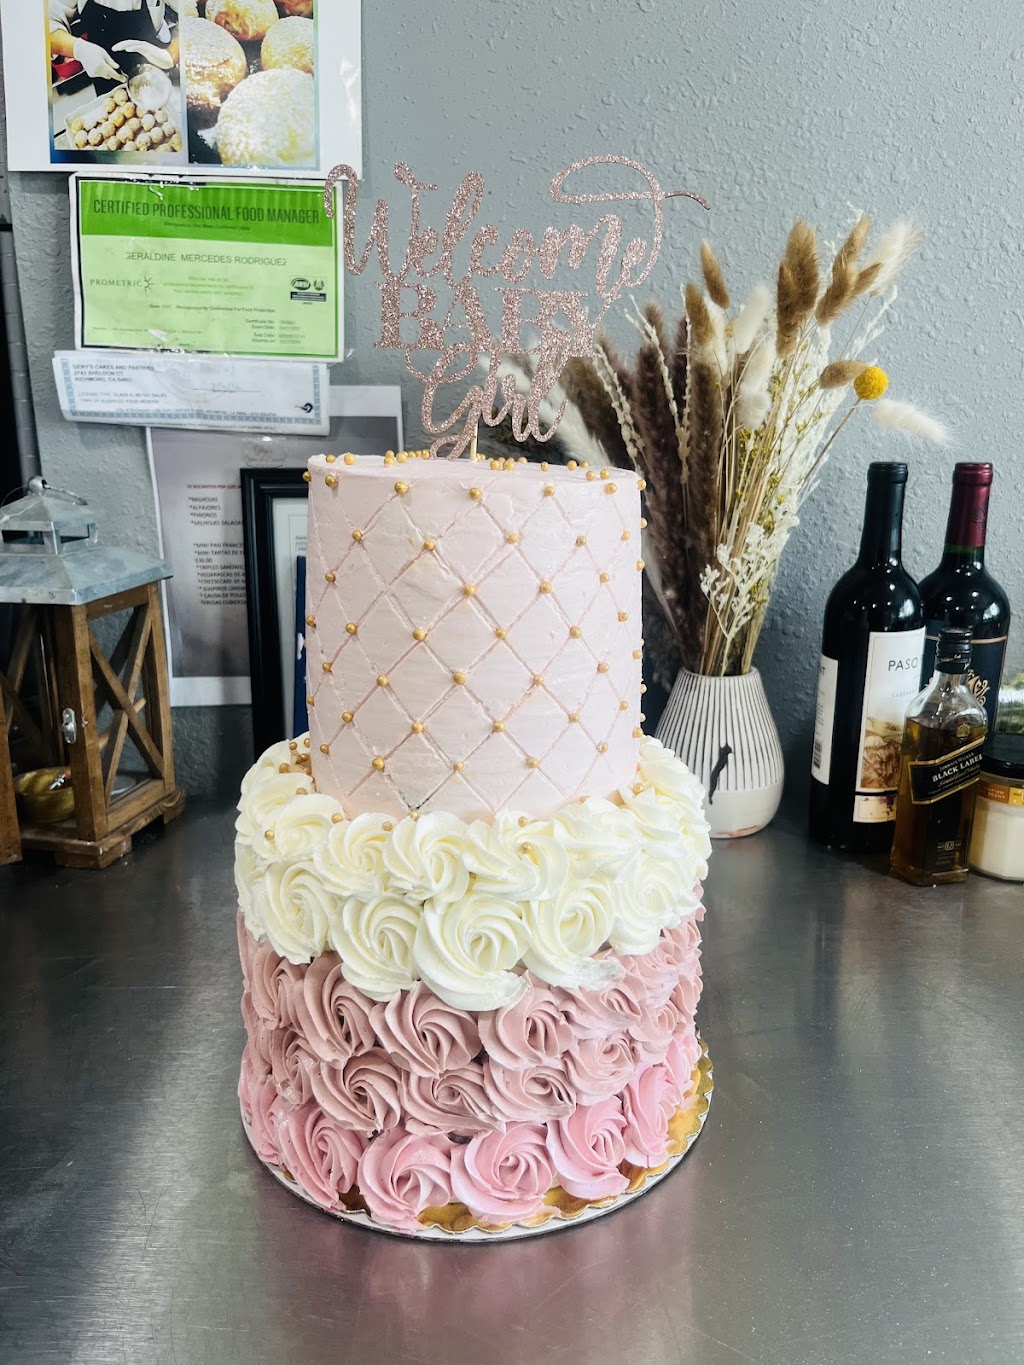 Gery’s cakes and pastries | Sheldon Ct, Richmond, CA 94803 | Phone: (415) 678-9603